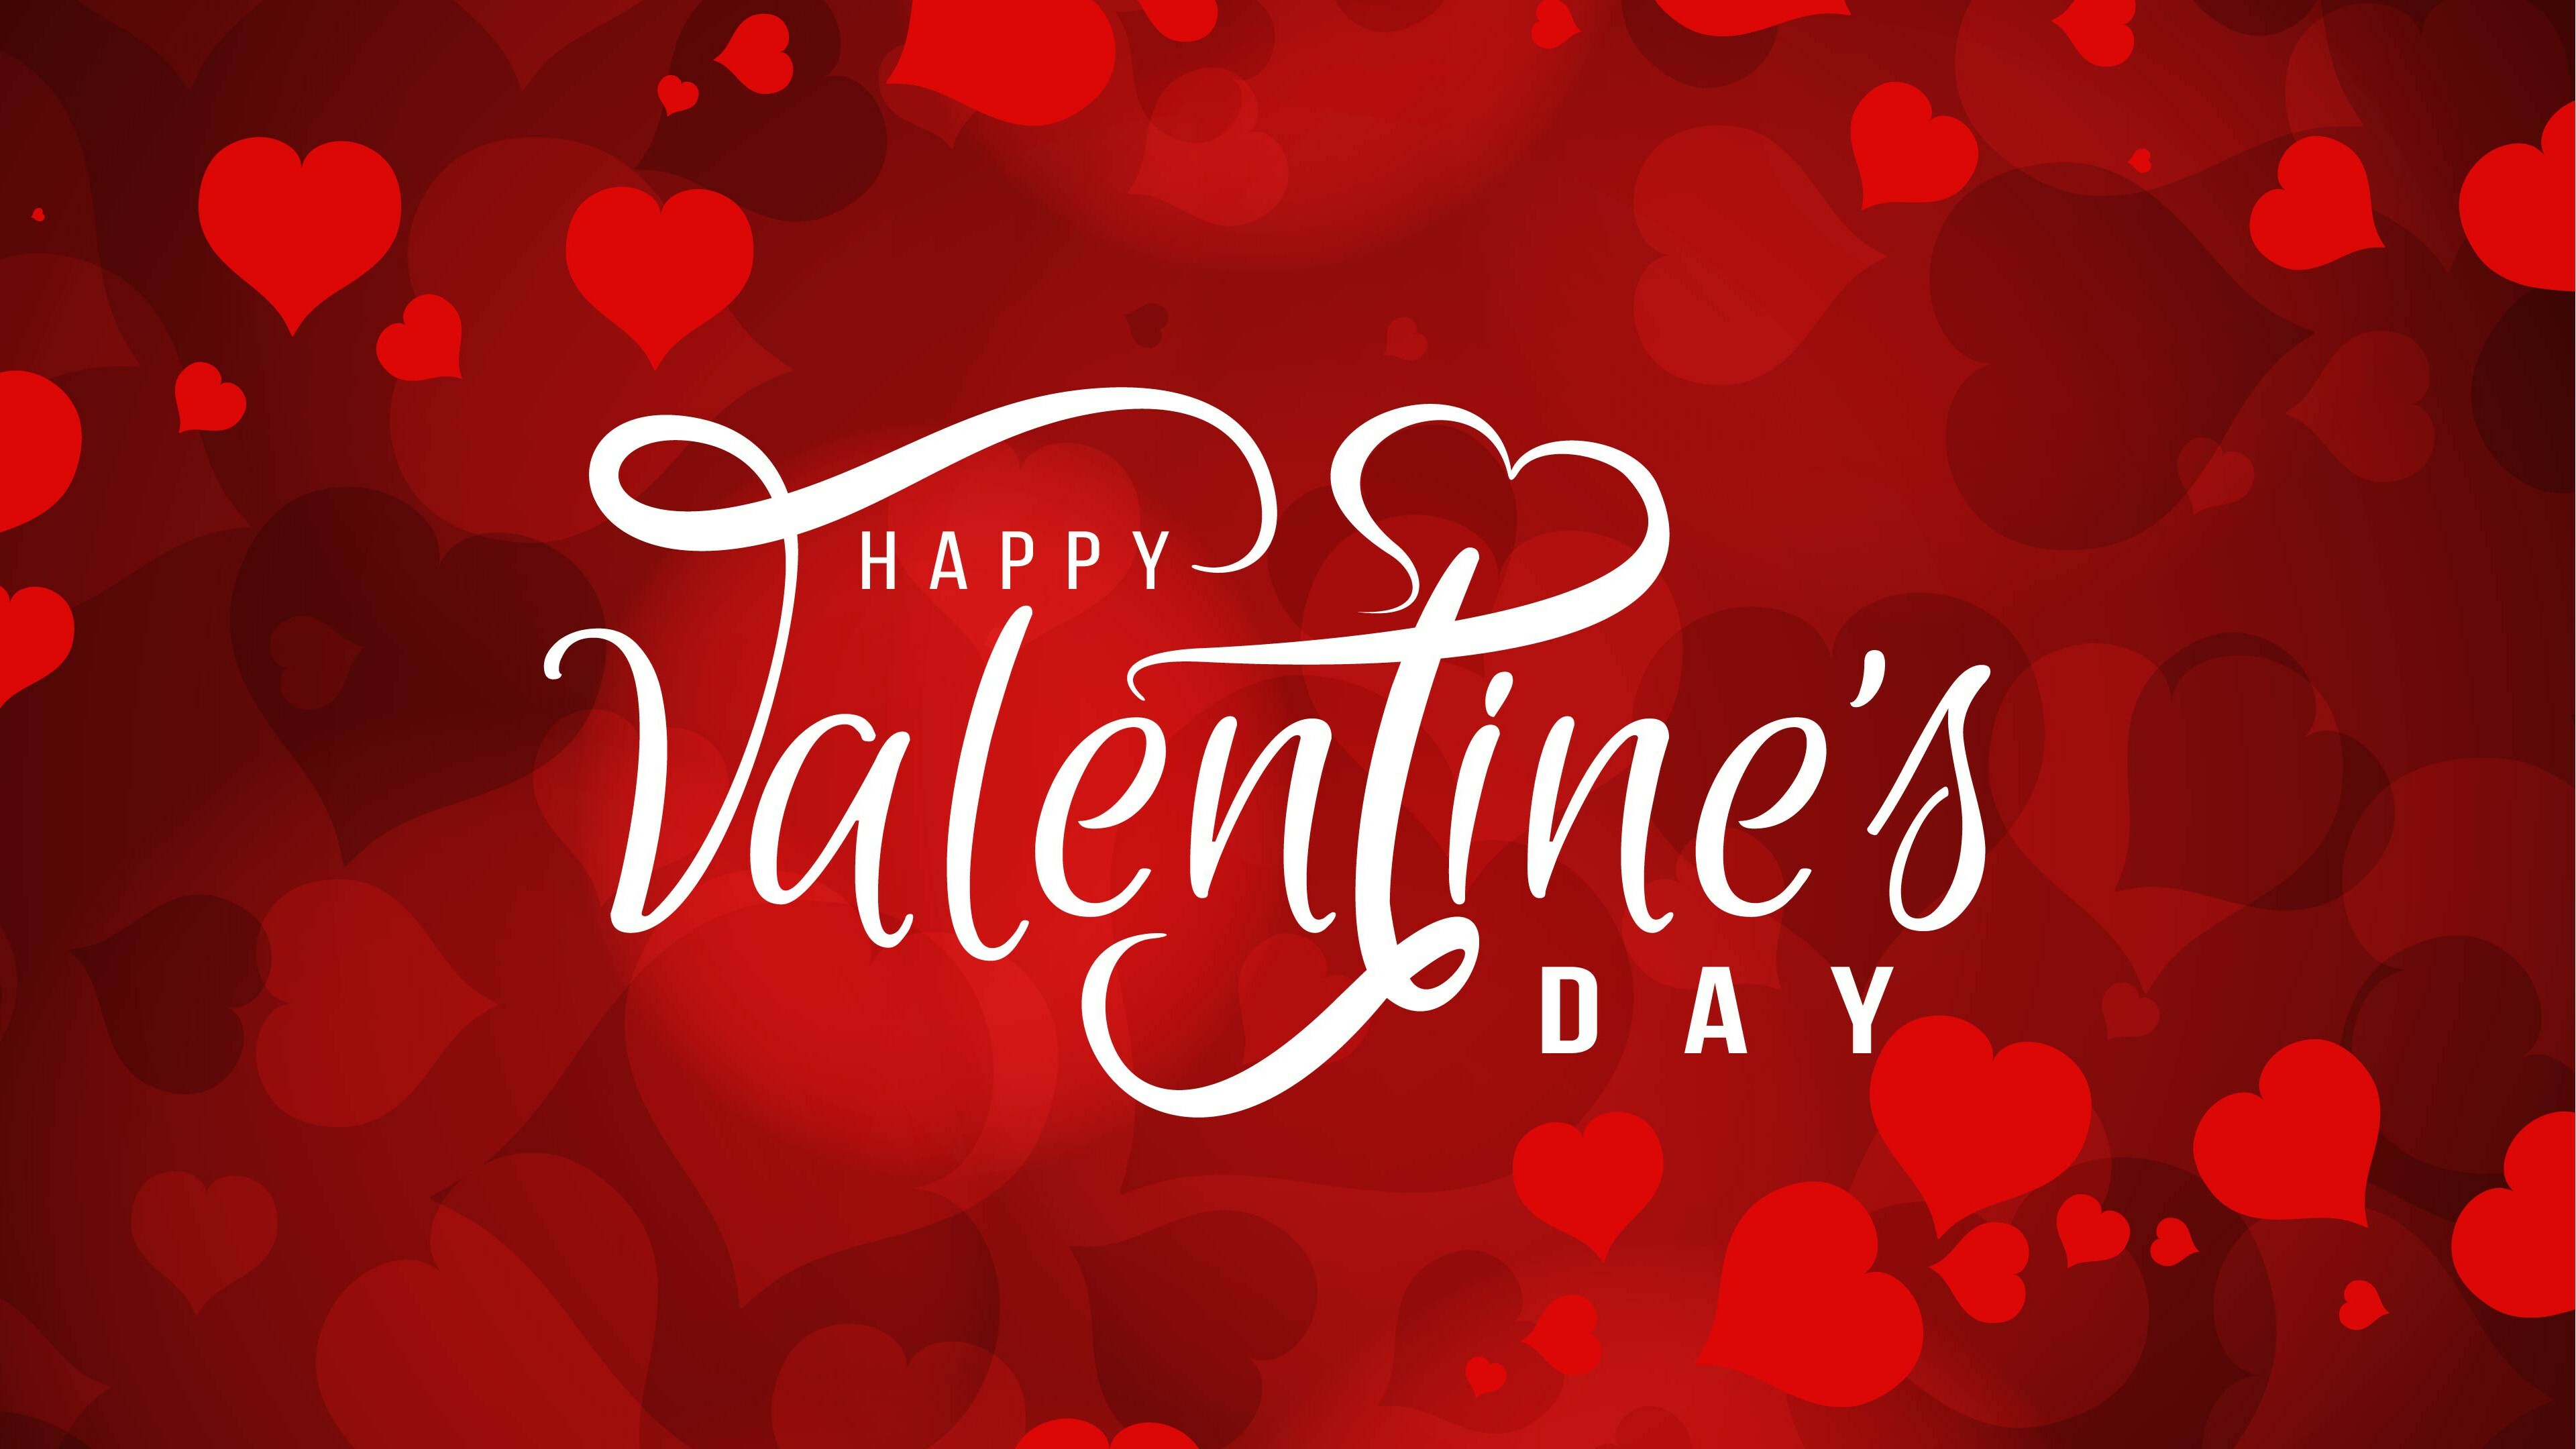 Happy valentines day, Love and happiness, Heartwarming moments, Celebrating love, 3840x2160 4K Desktop